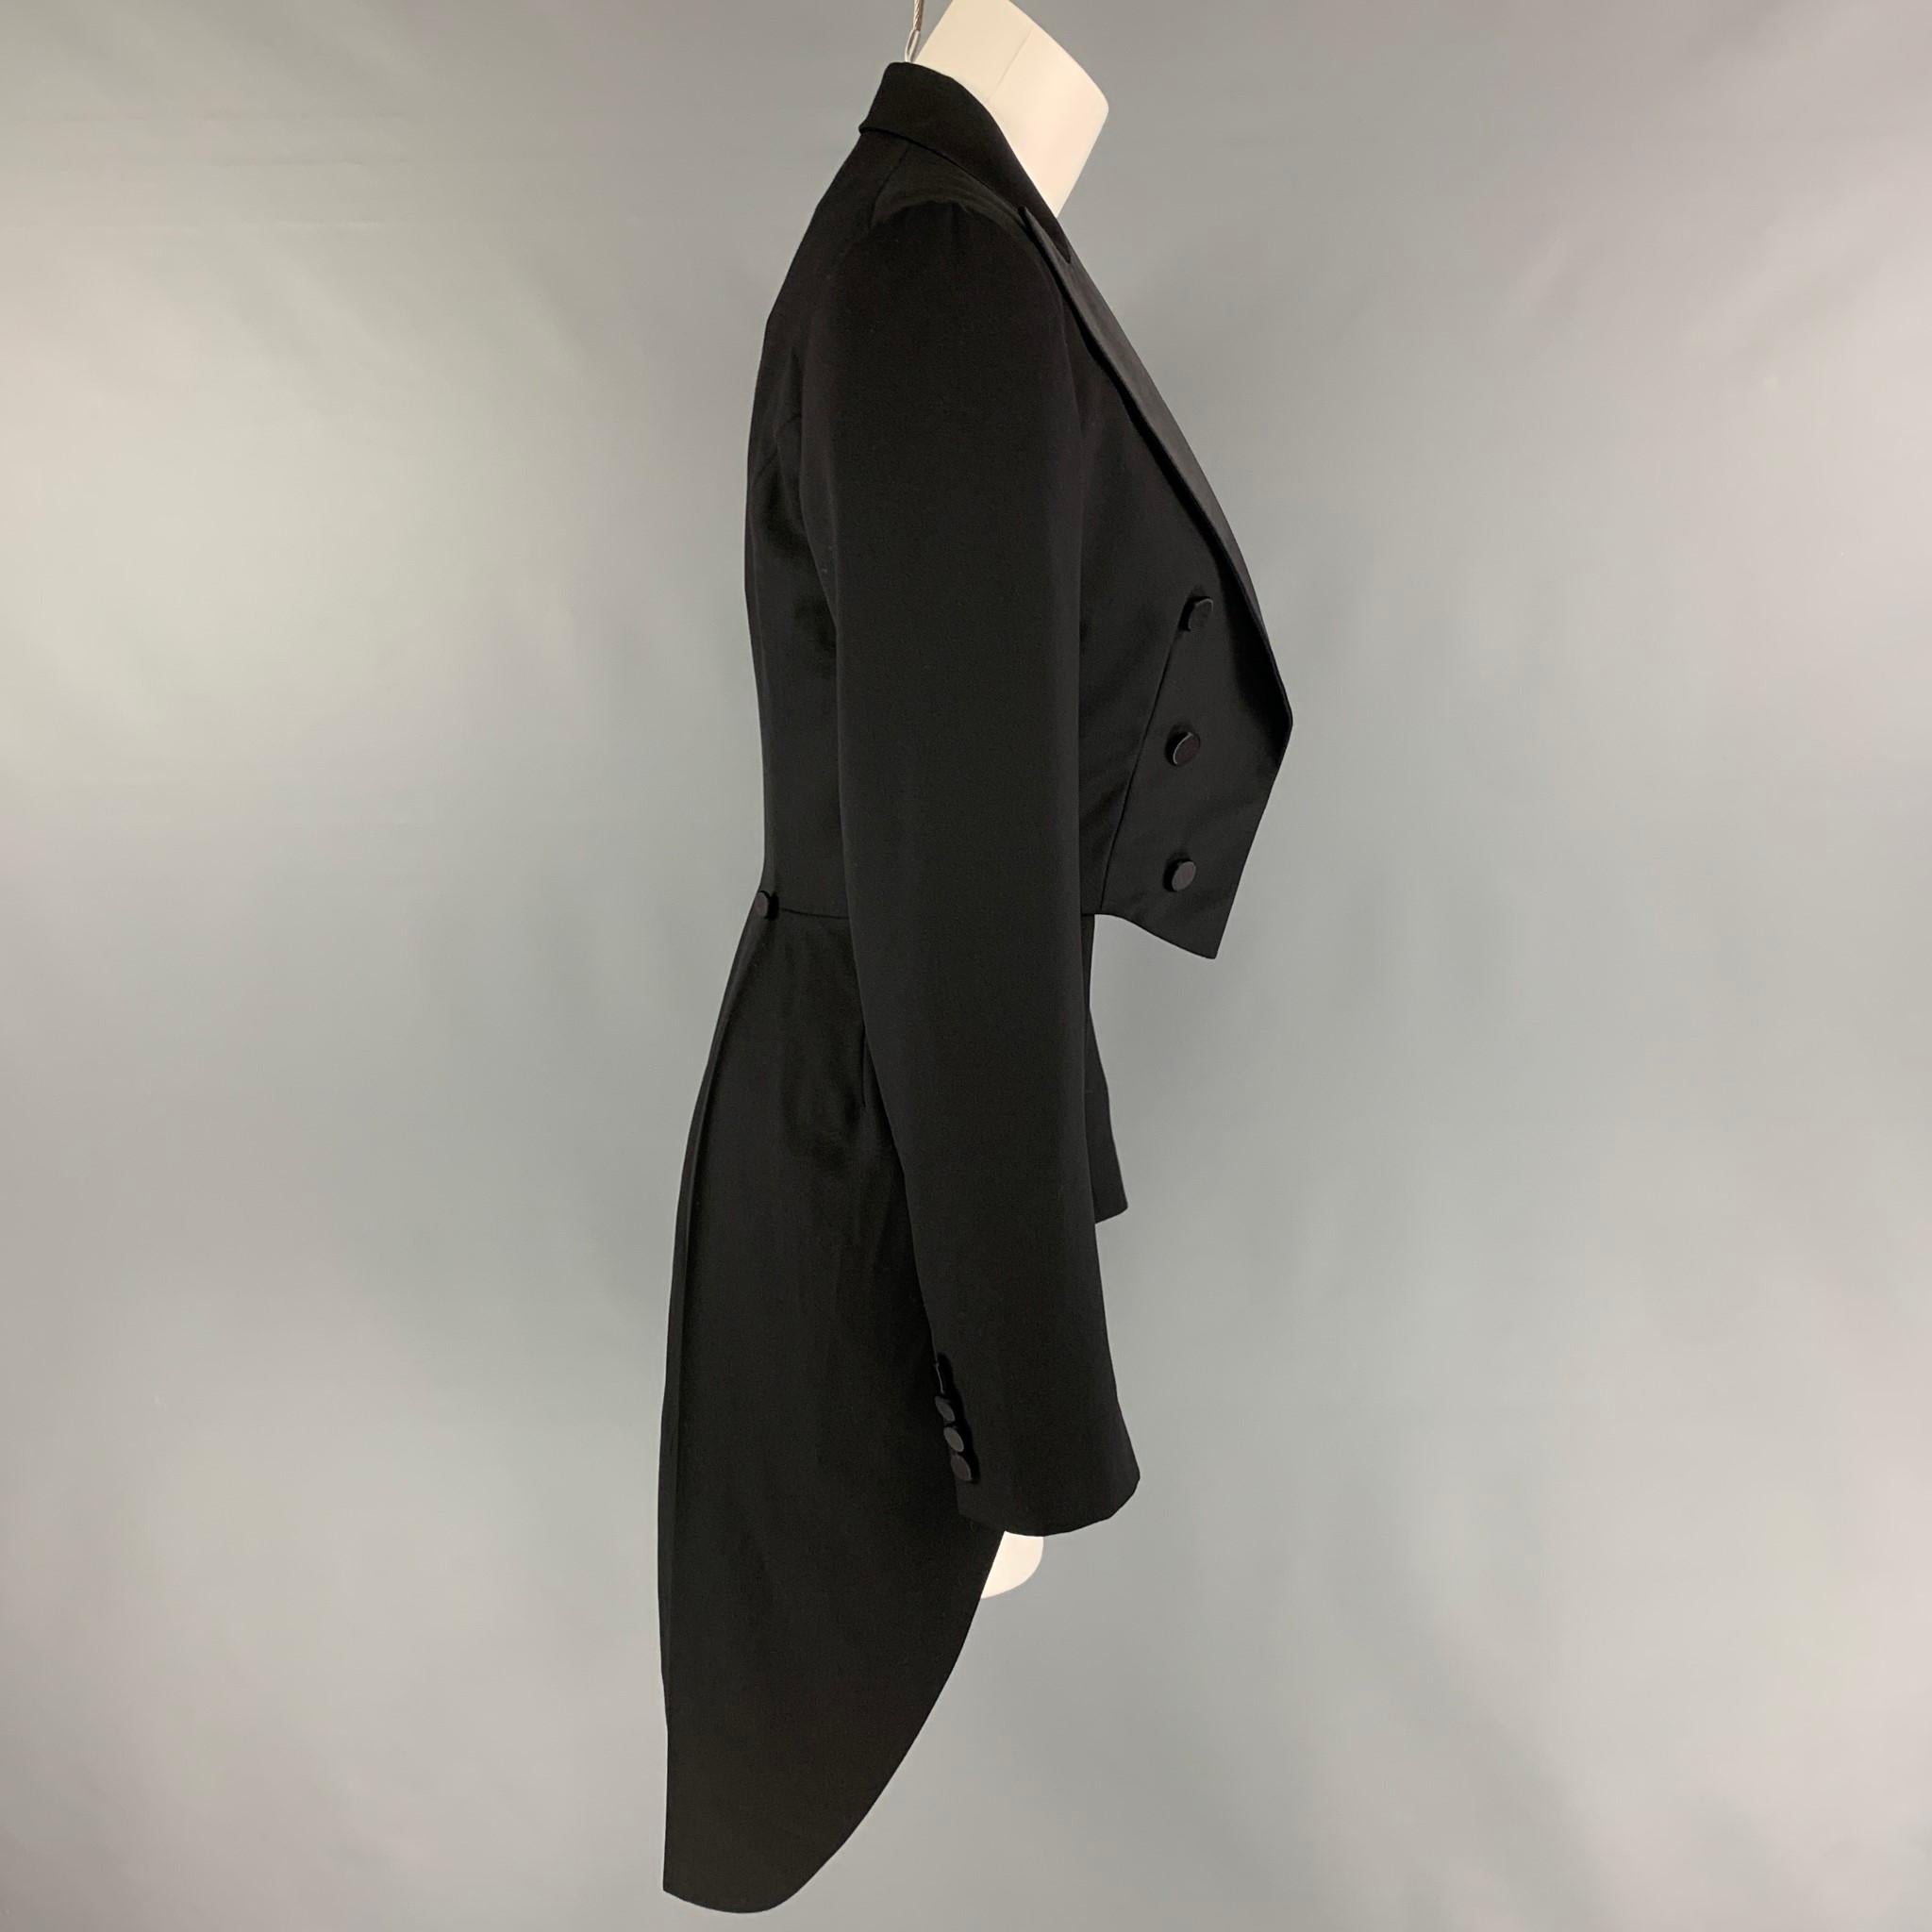 RALPH LAUREN 'Black Label' jacket comes in a black wool featuring a peak lapel, tails design, double breasted detail, and a open front. 

New With Tags. 
Marked: 4
Original Retail Price: $1,798.00

Measurements:

Shoulder: 16 in.
Bust: 32